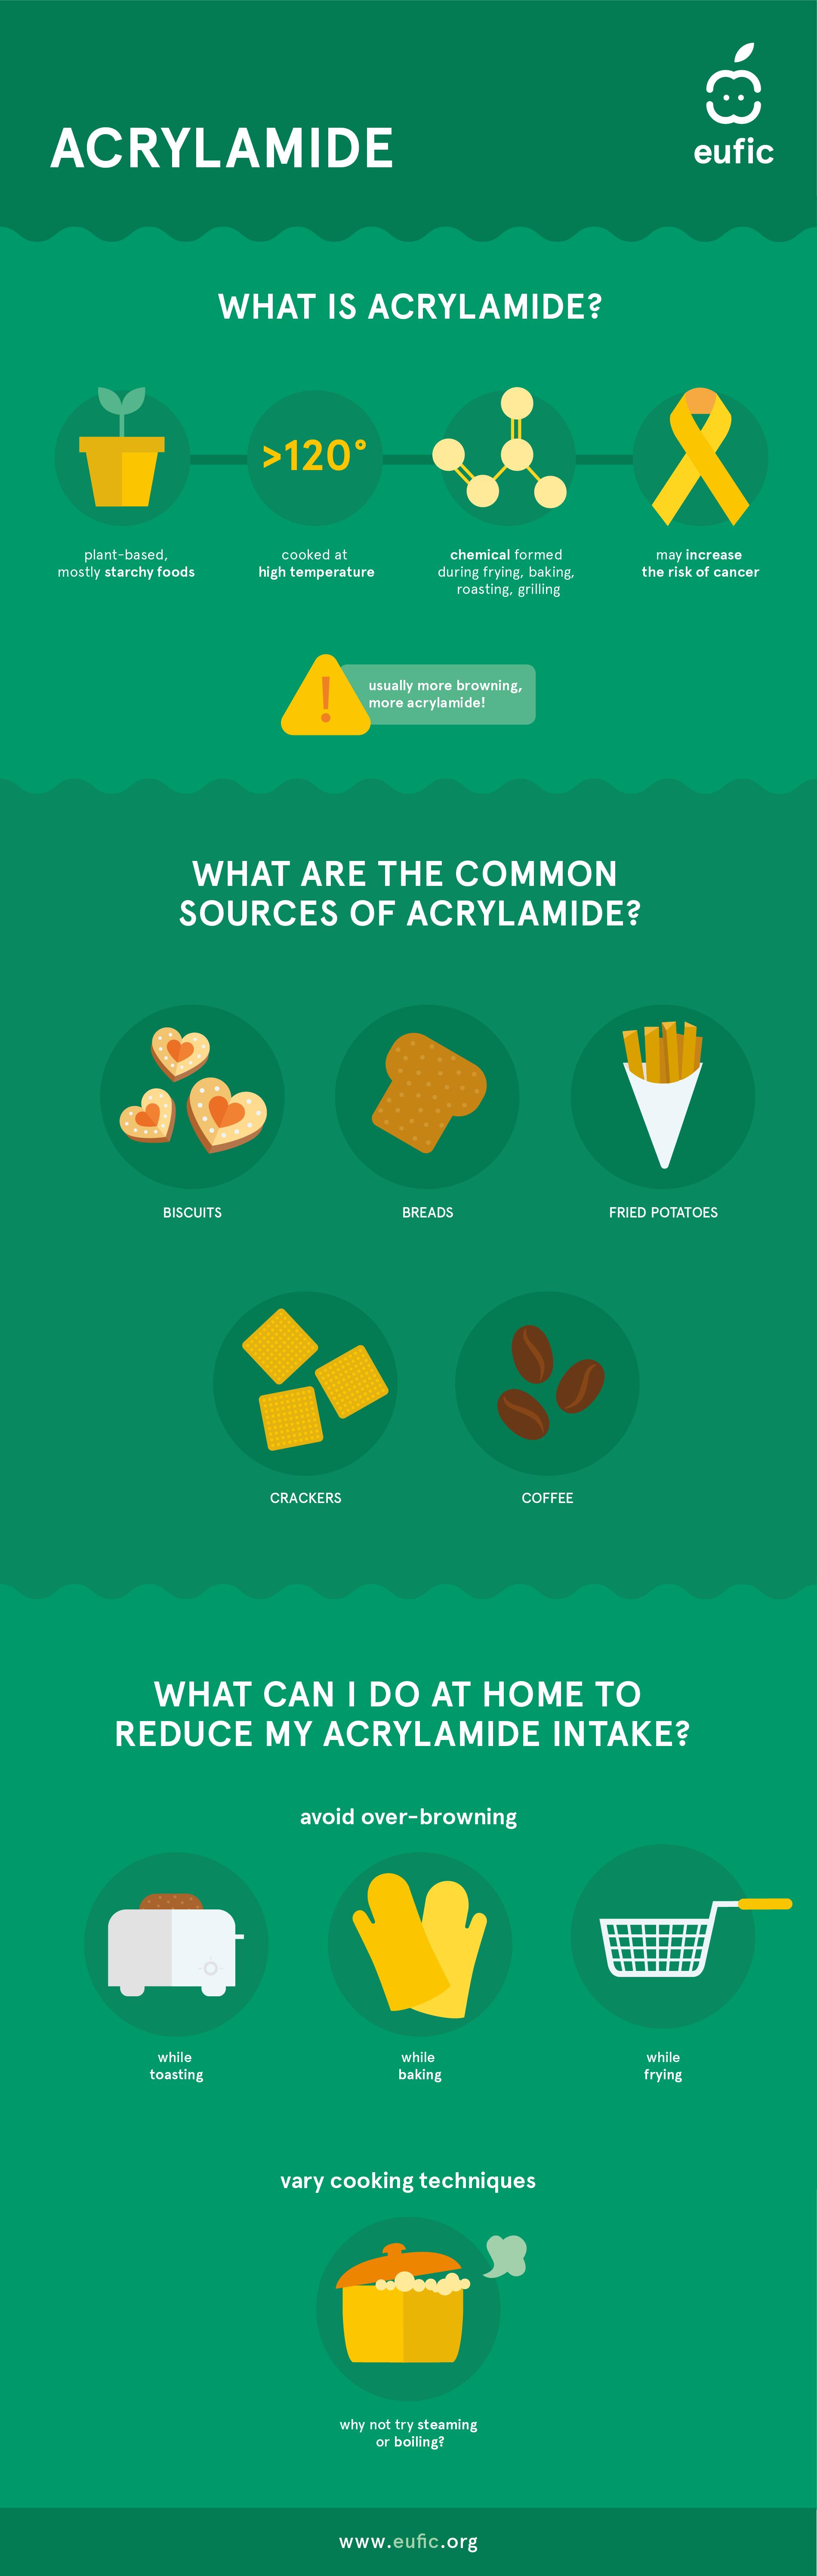 How to reduce acrylamide formation at home